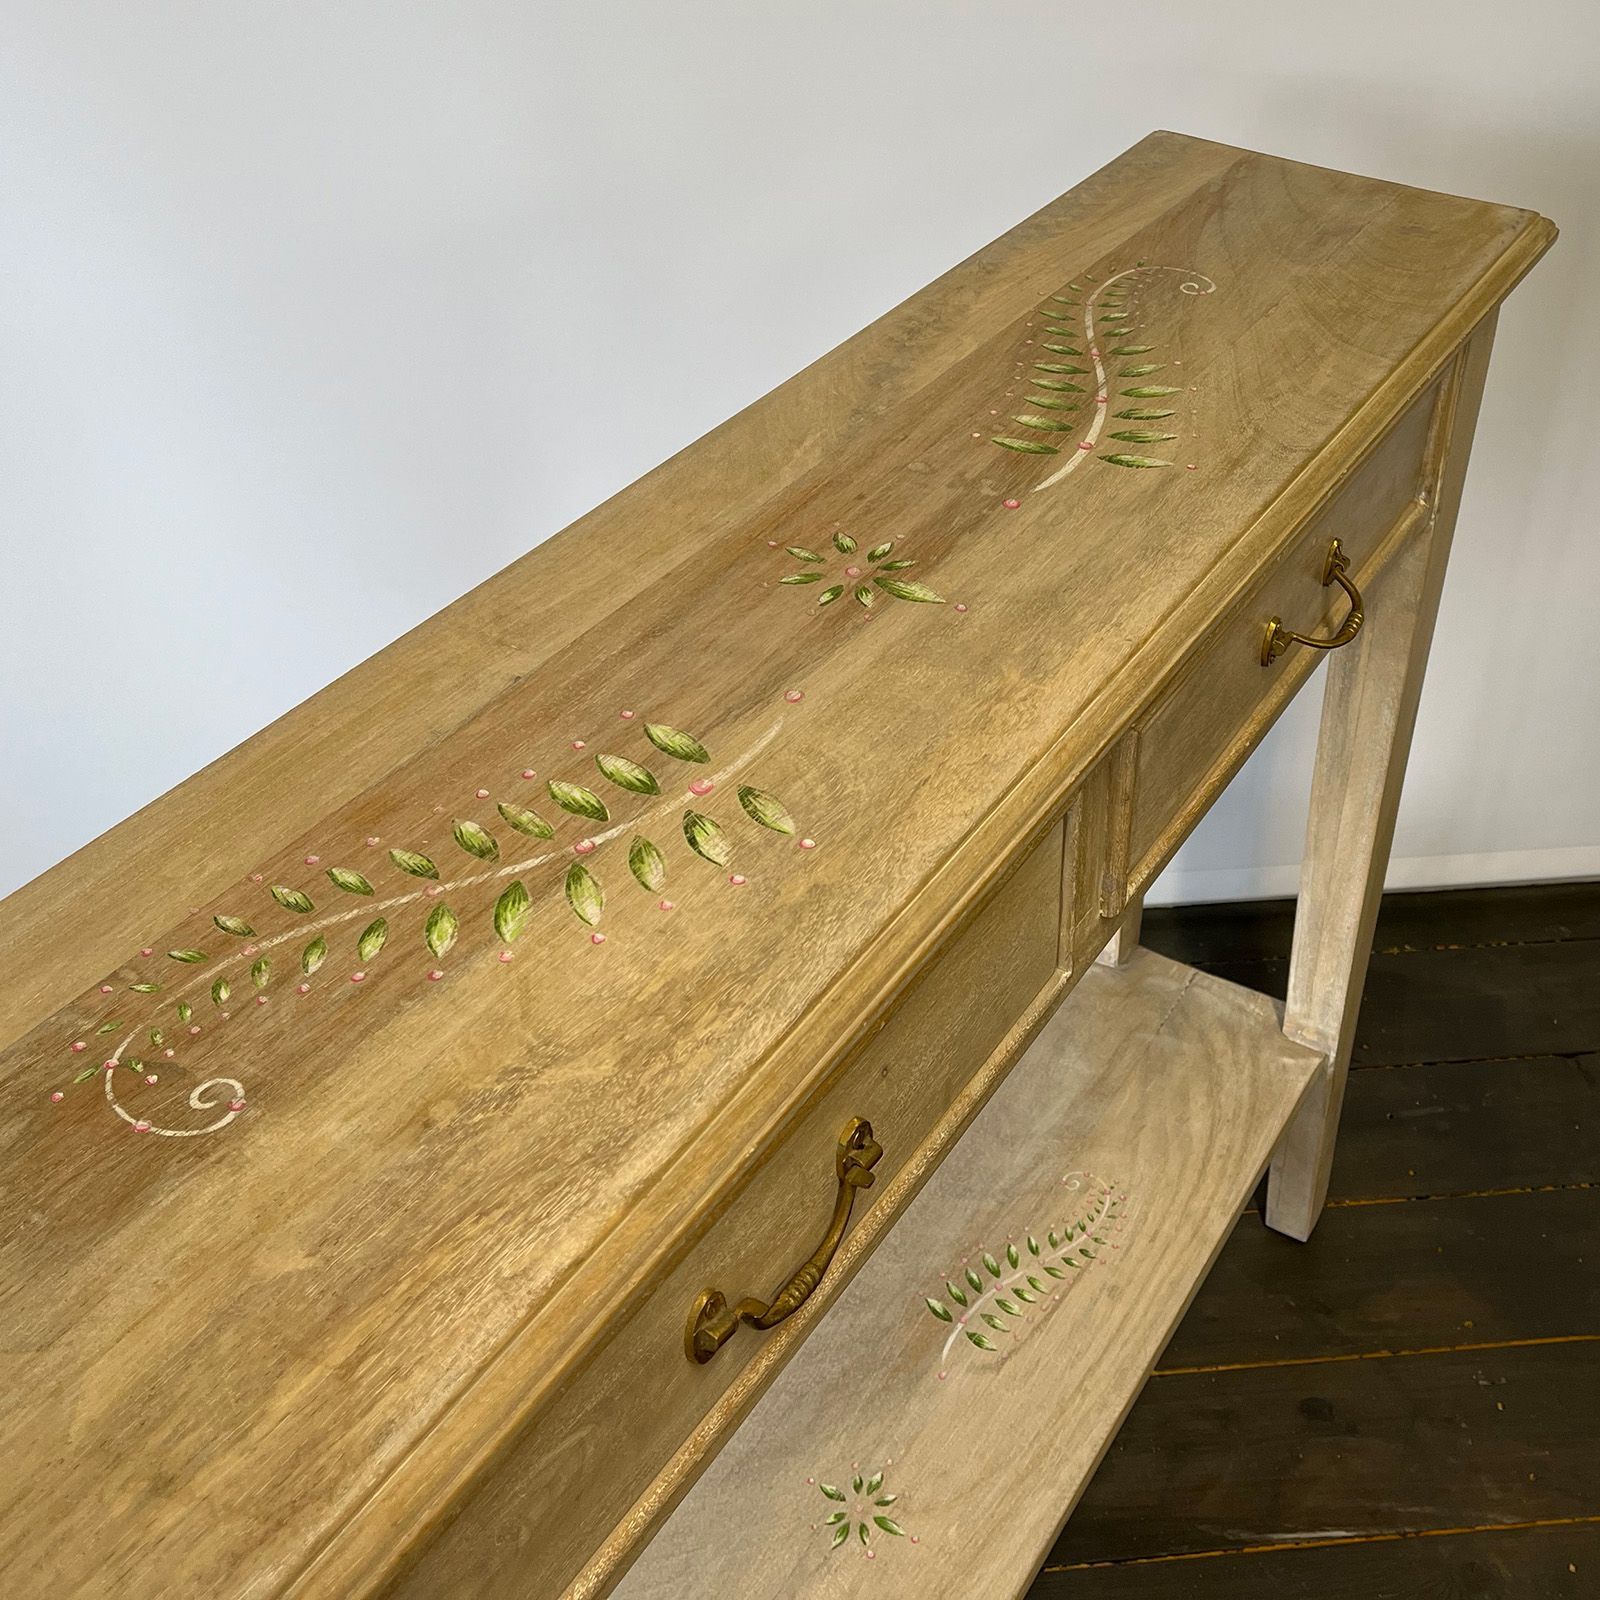 Console table with a fern design by Helen Bateman Upcycled